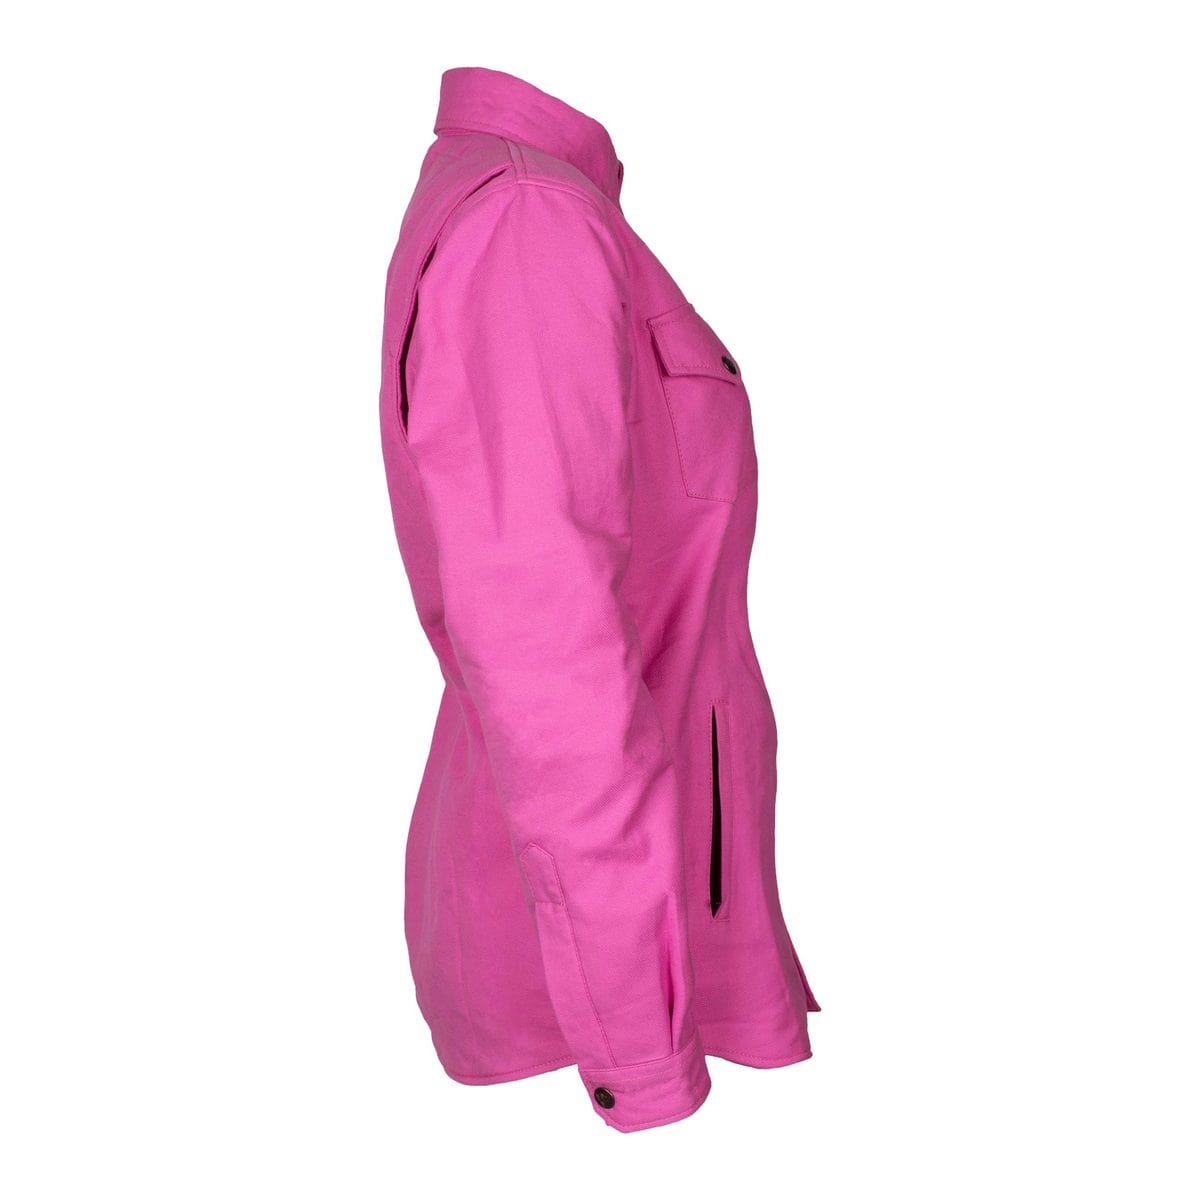 Protective Flannel Shirt for Women - Pink Solid